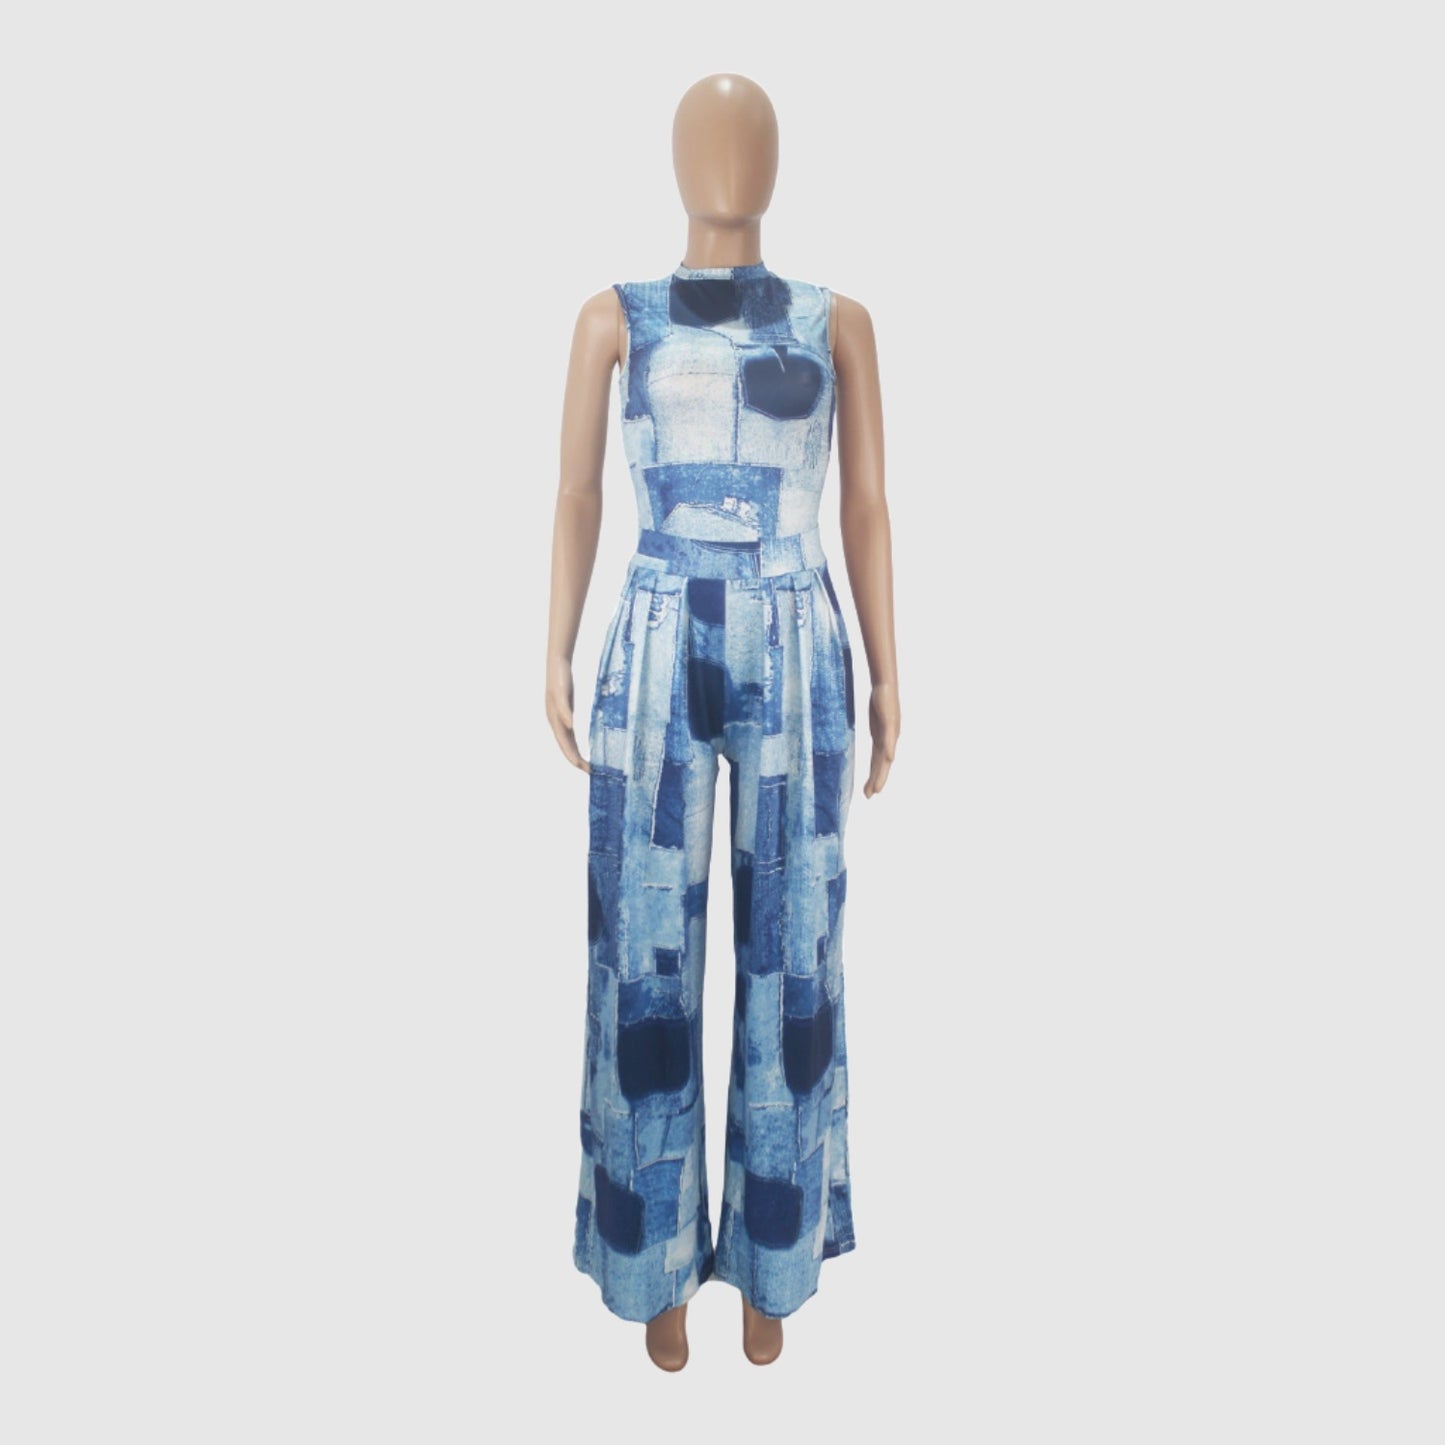 Women's Colorful Pattern Print Sleeveless Wide Leg Pants and Bodysuit Outfit Set